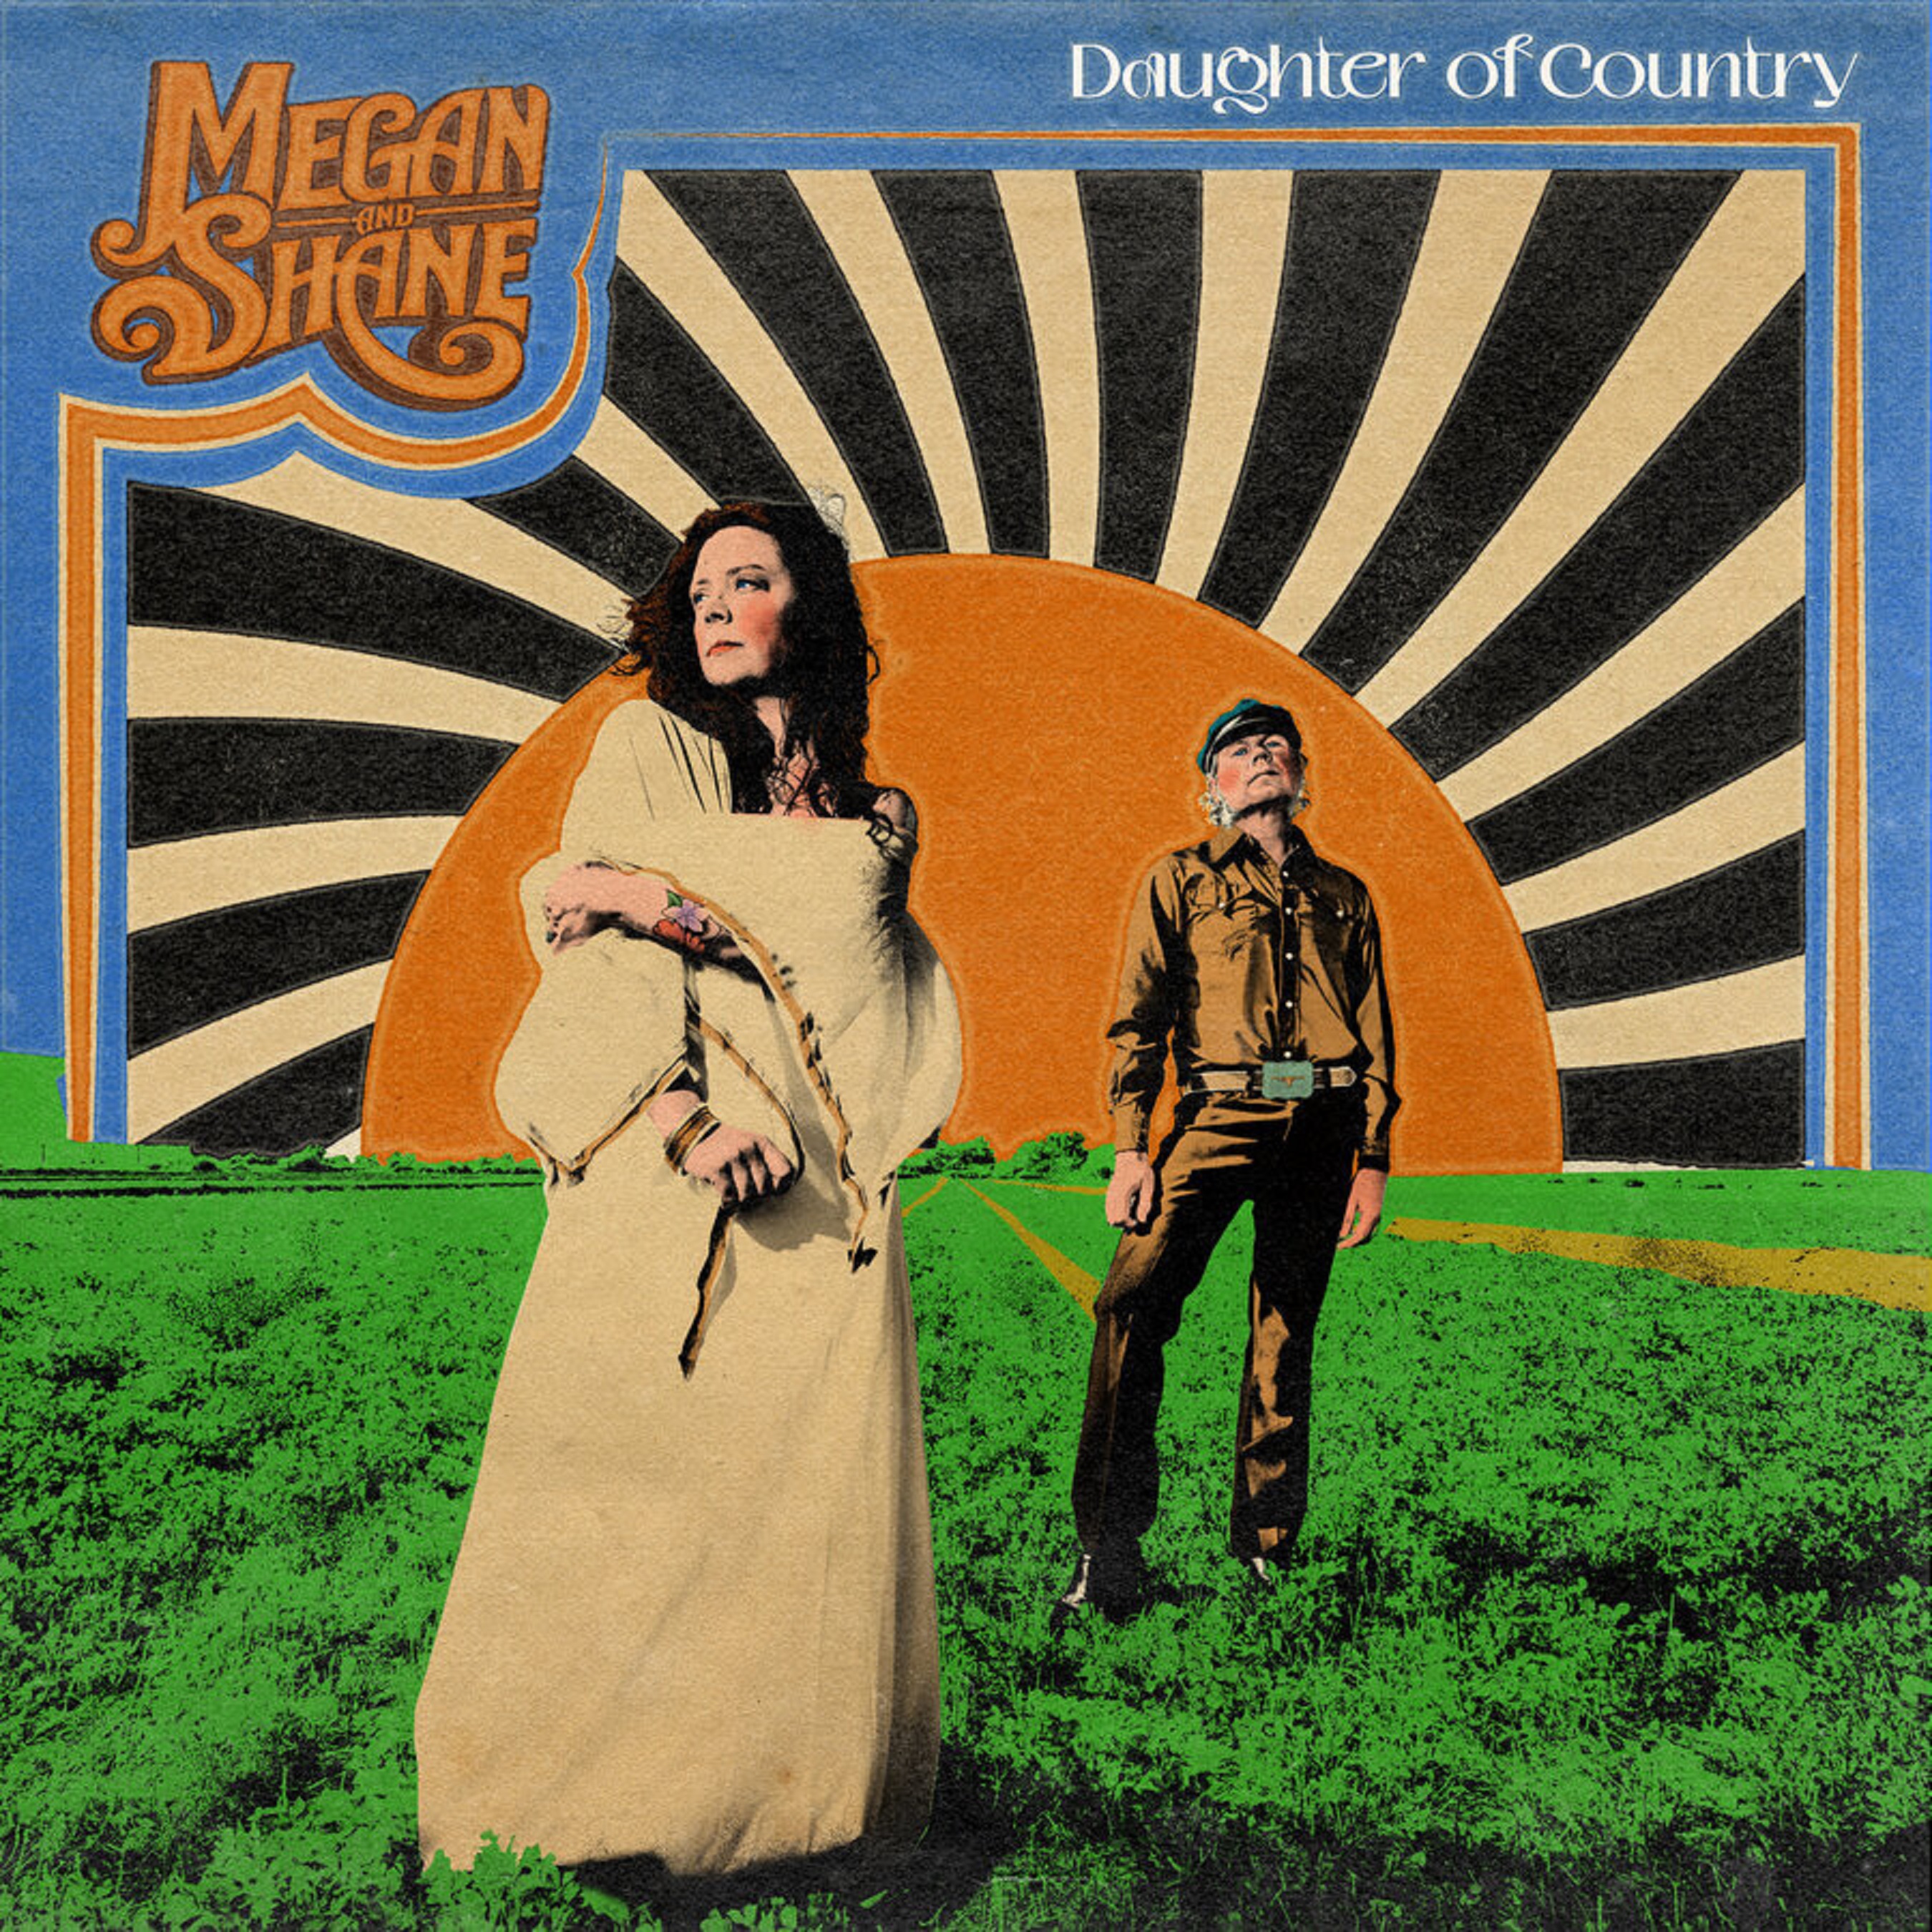 Megan & Shane release title track from forthcoming LP 𝑫𝒂𝒖𝒈𝒉𝒕𝒆𝒓 𝒐𝒇 𝑪𝒐𝒖𝒏𝒕𝒓𝒚